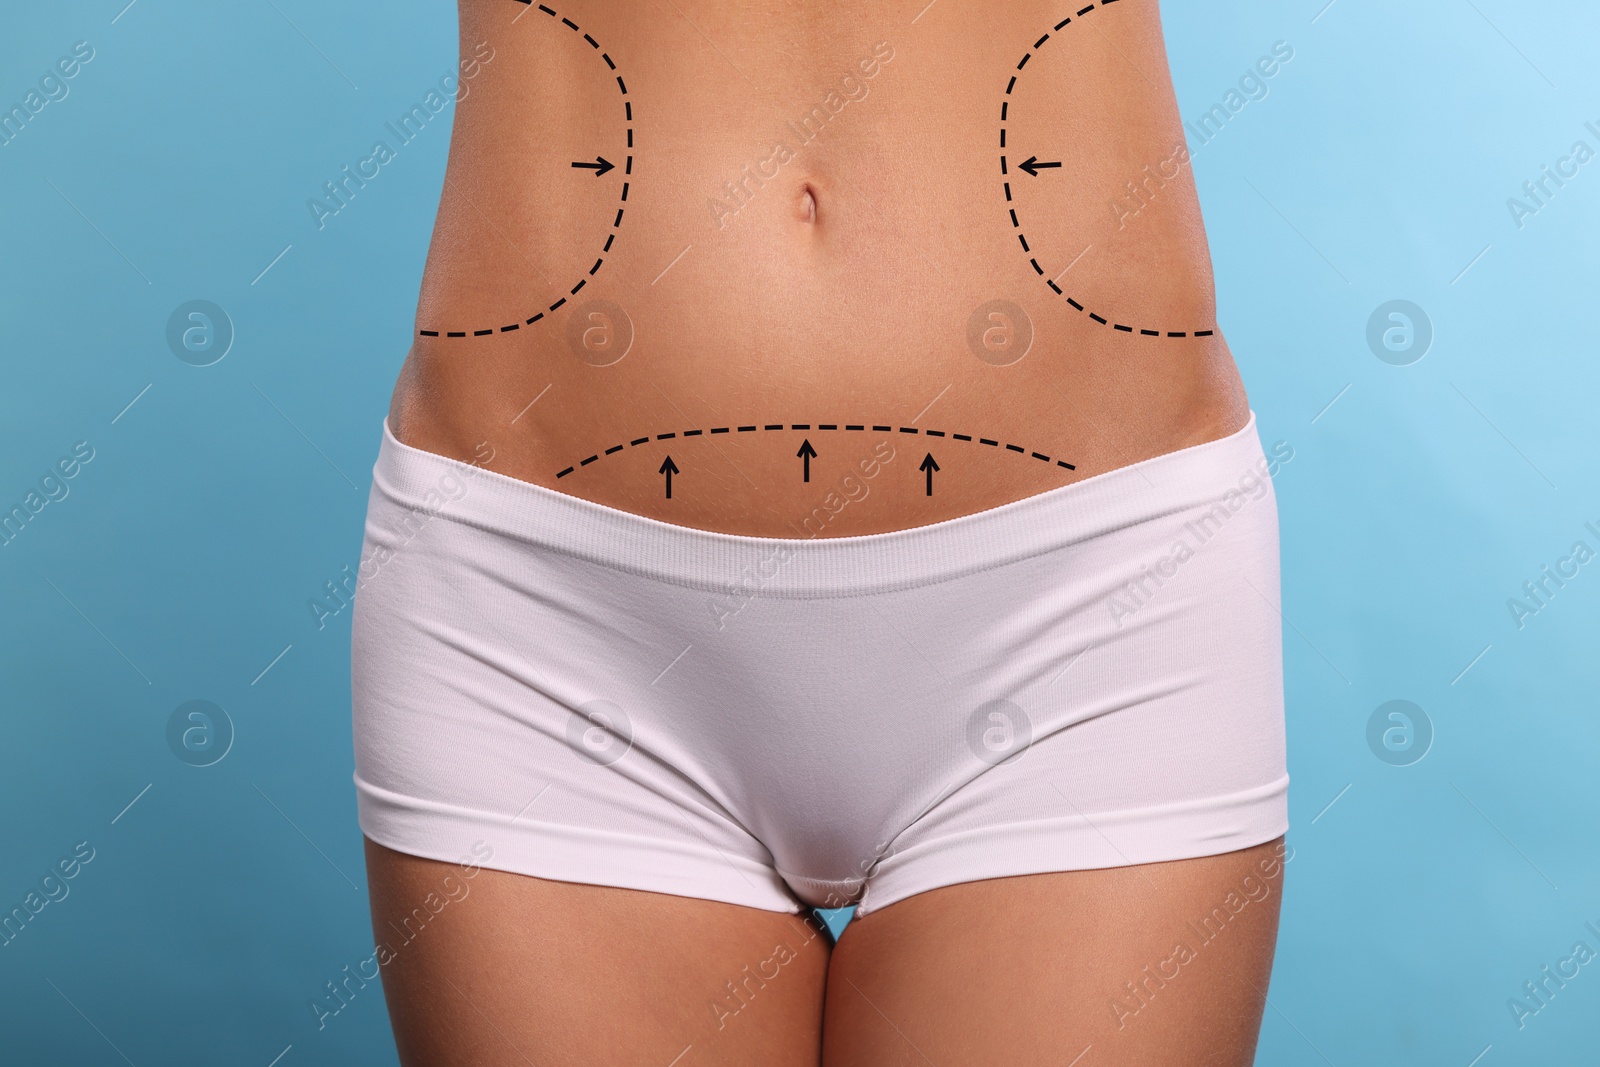 Image of Woman with markings for cosmetic surgery on her abdomen against light blue background, closeup